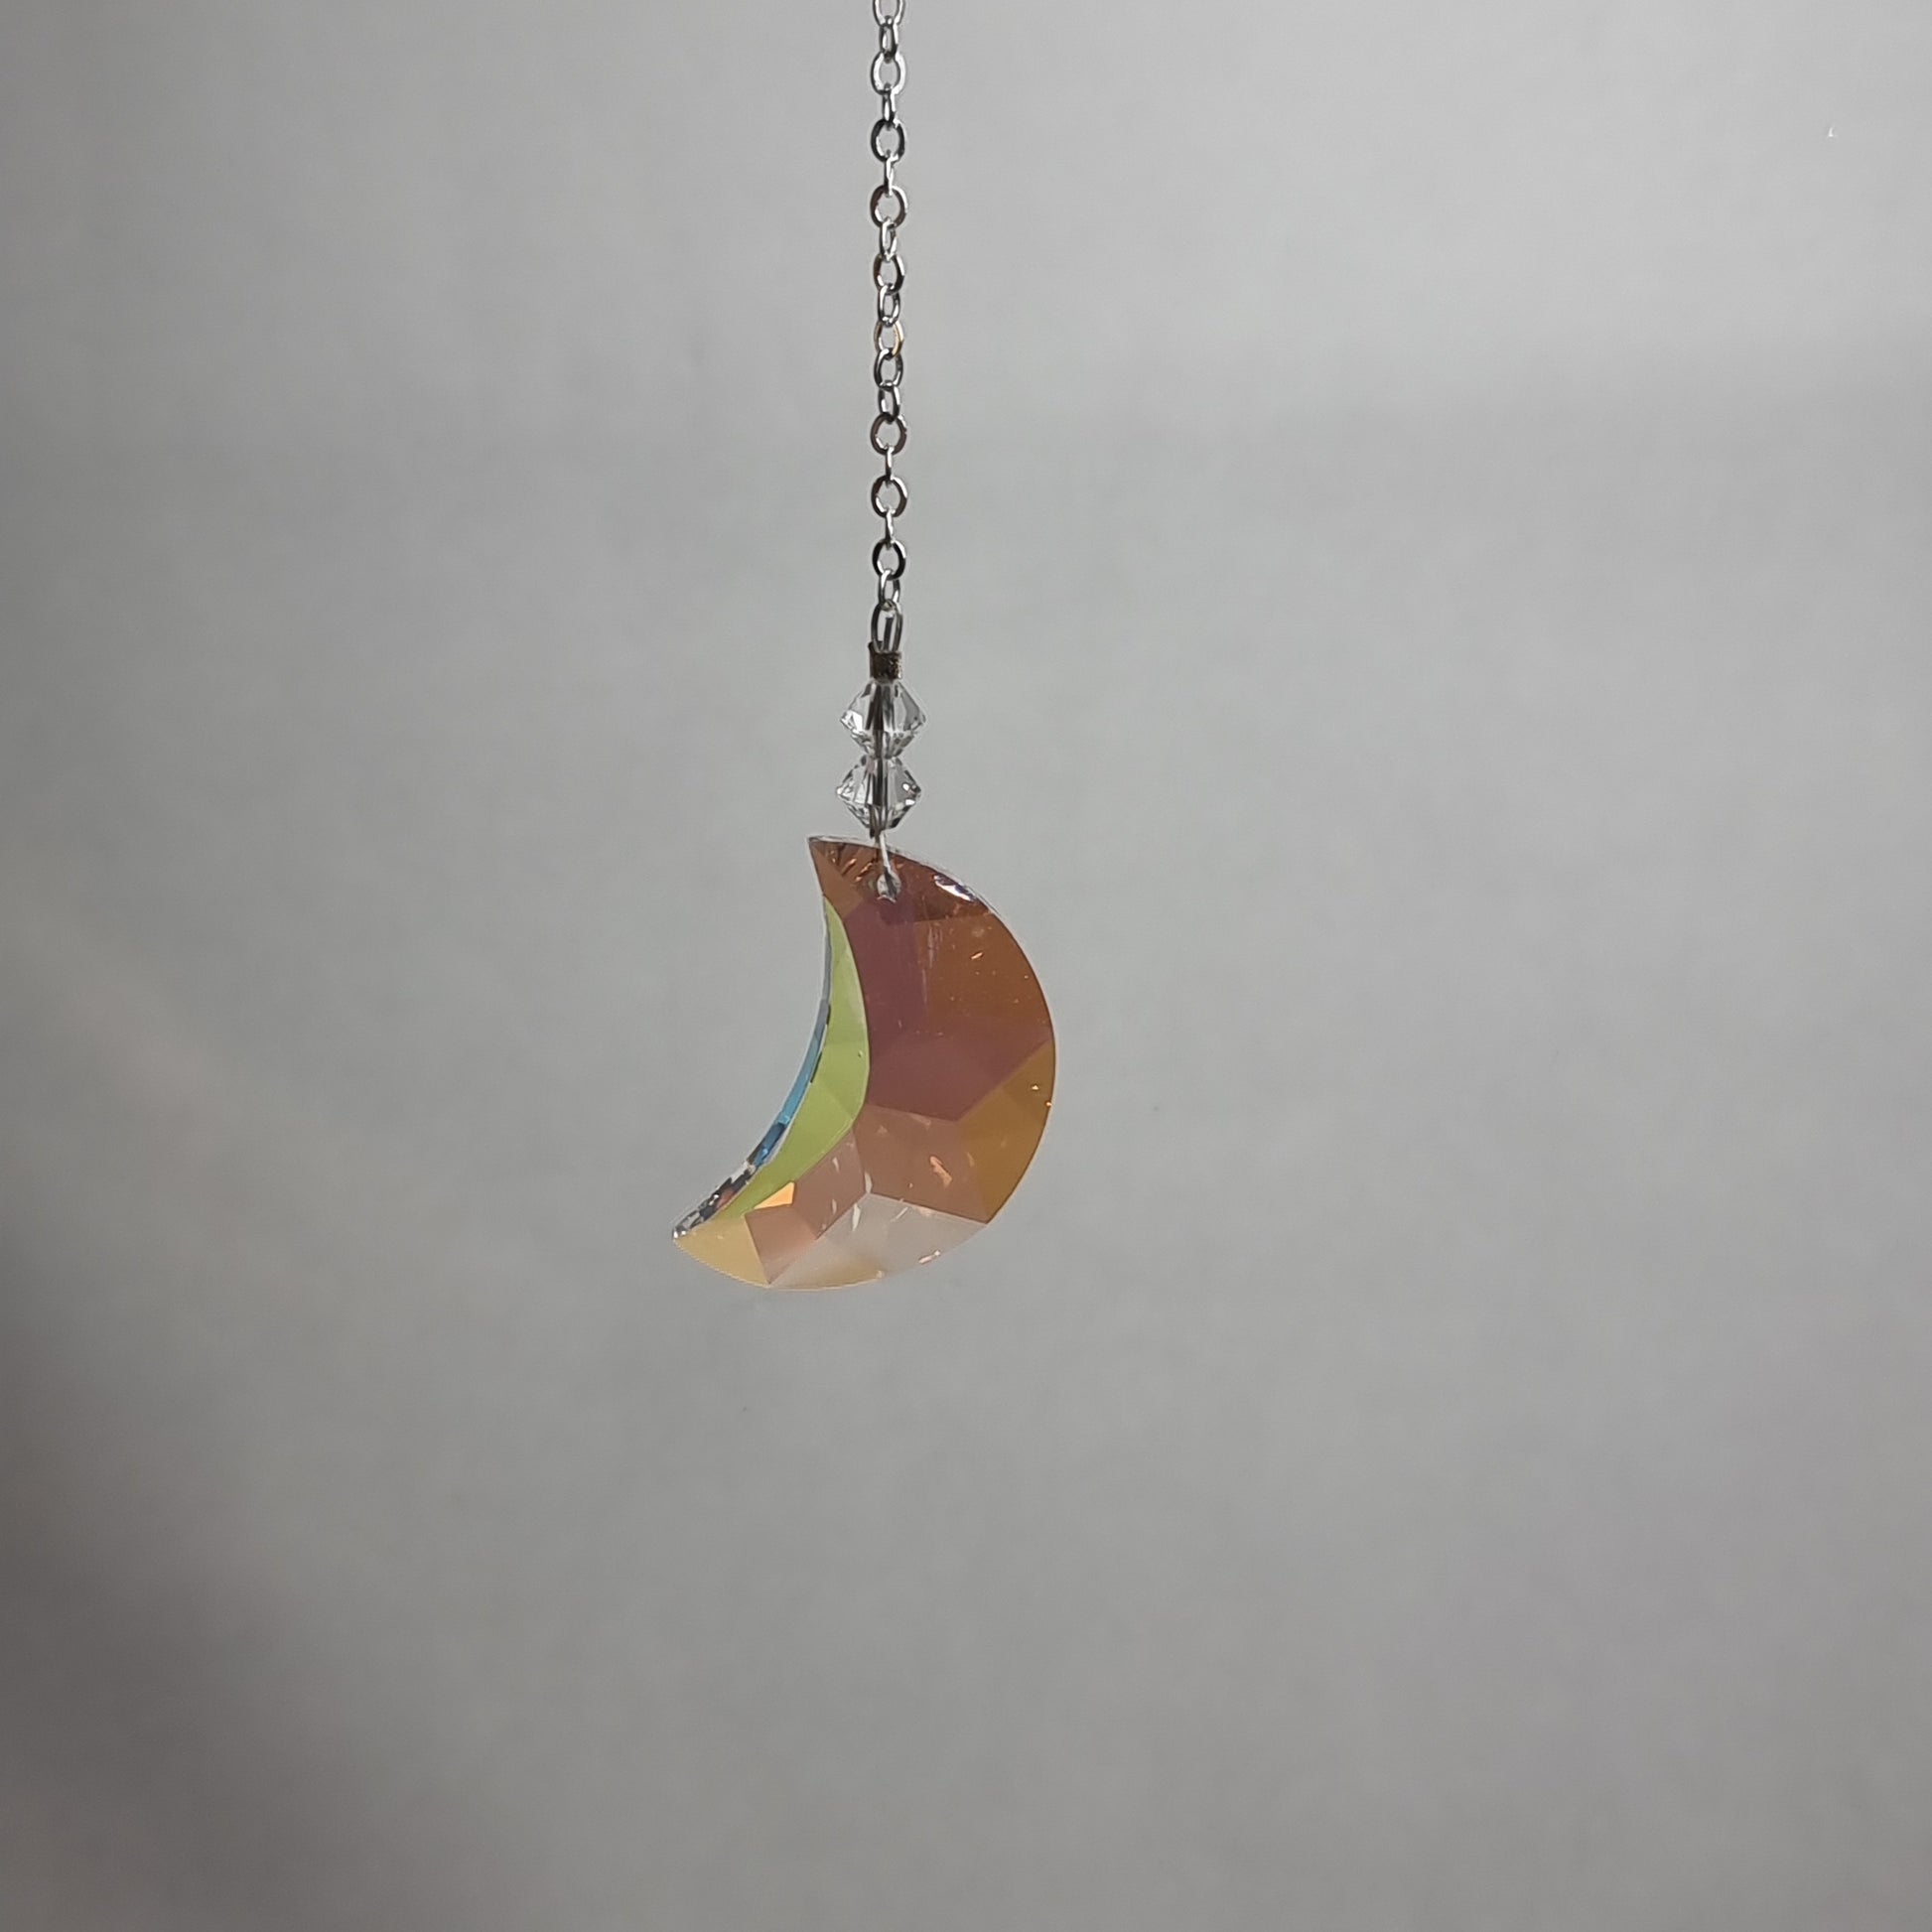 Clarus hanging - moon - Rivendell Shop